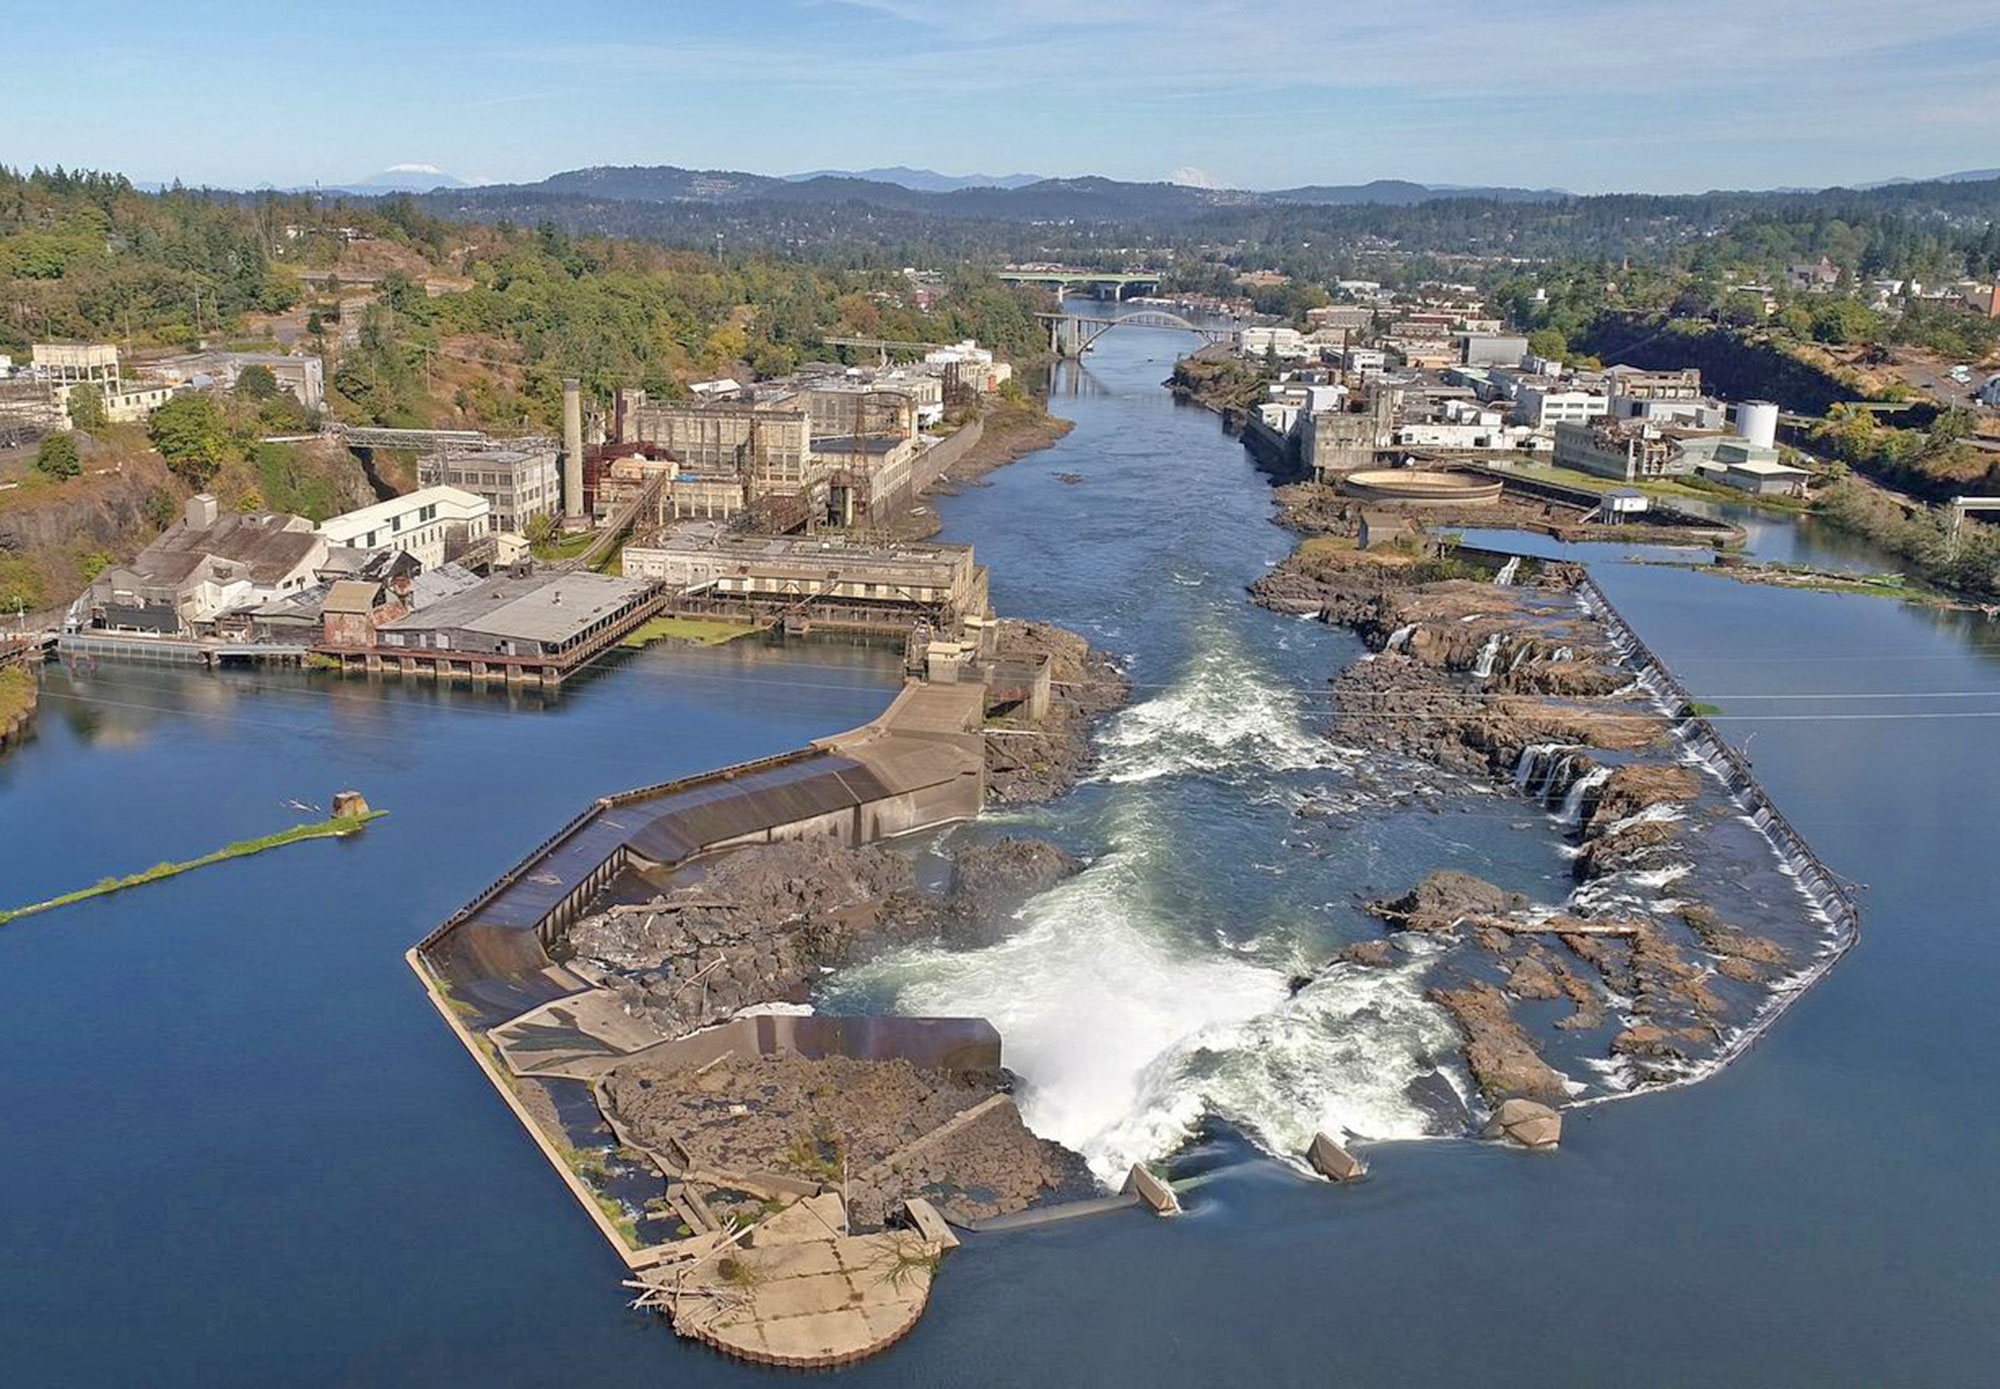 A view of Willamette Falls from the air.